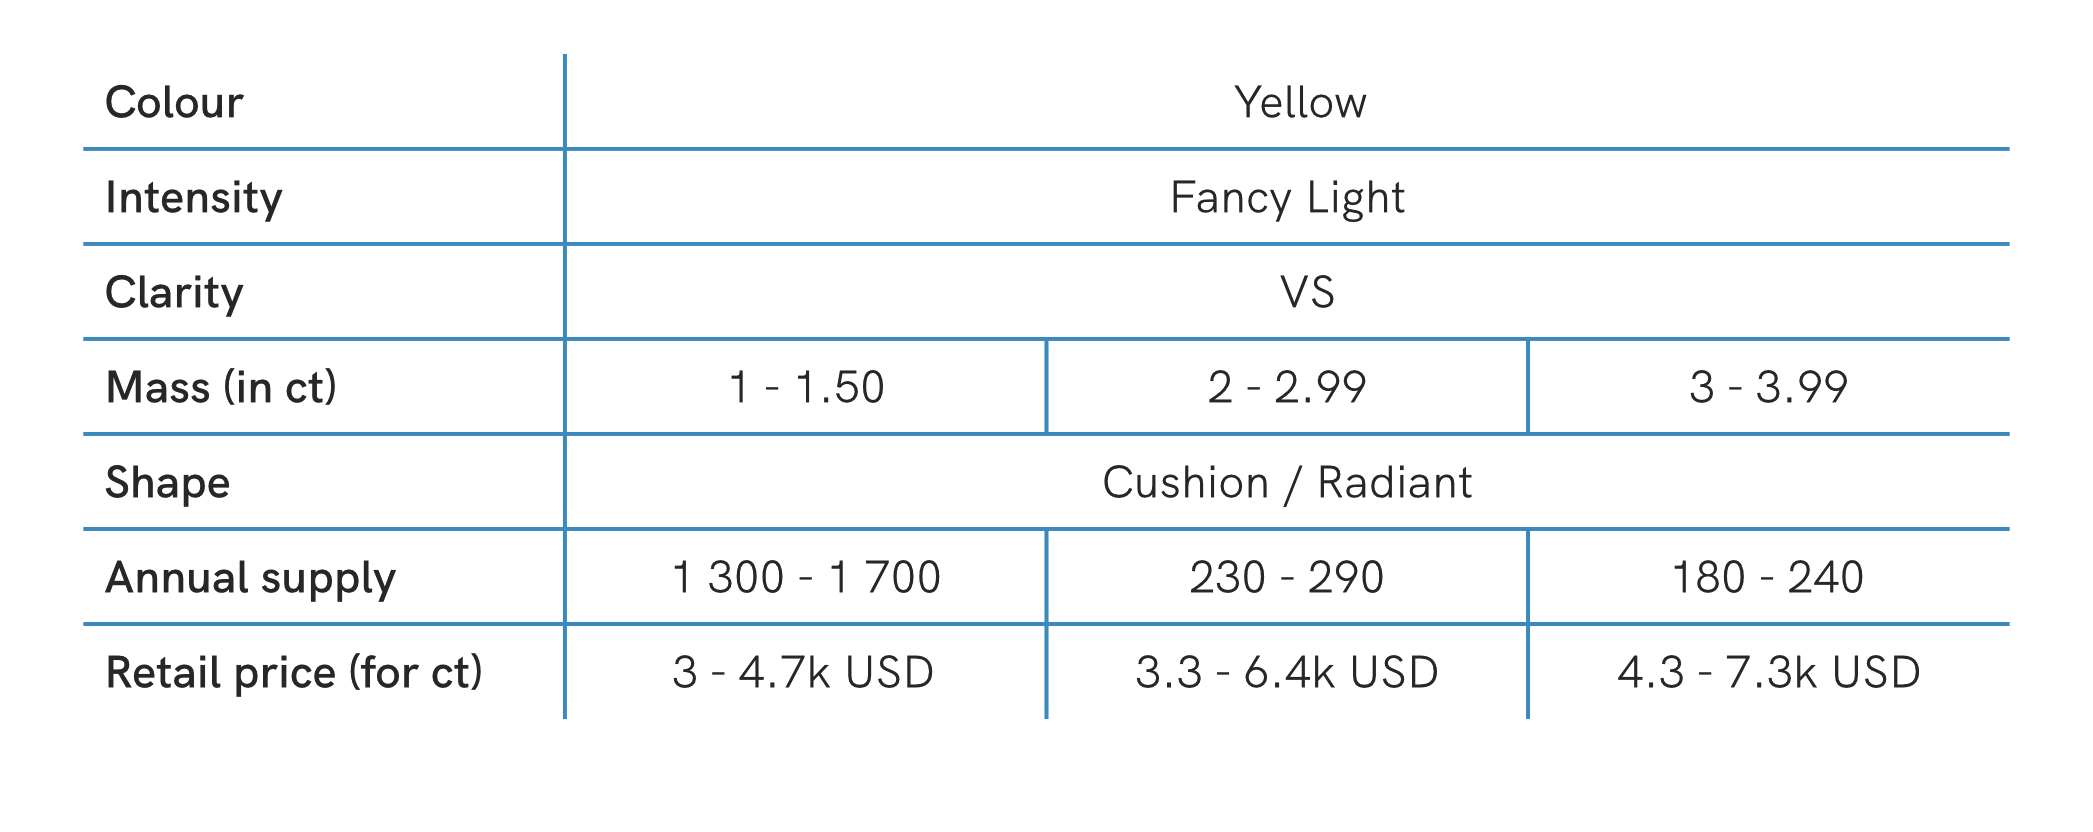 yellow diamond retail prices based on its characteristics table